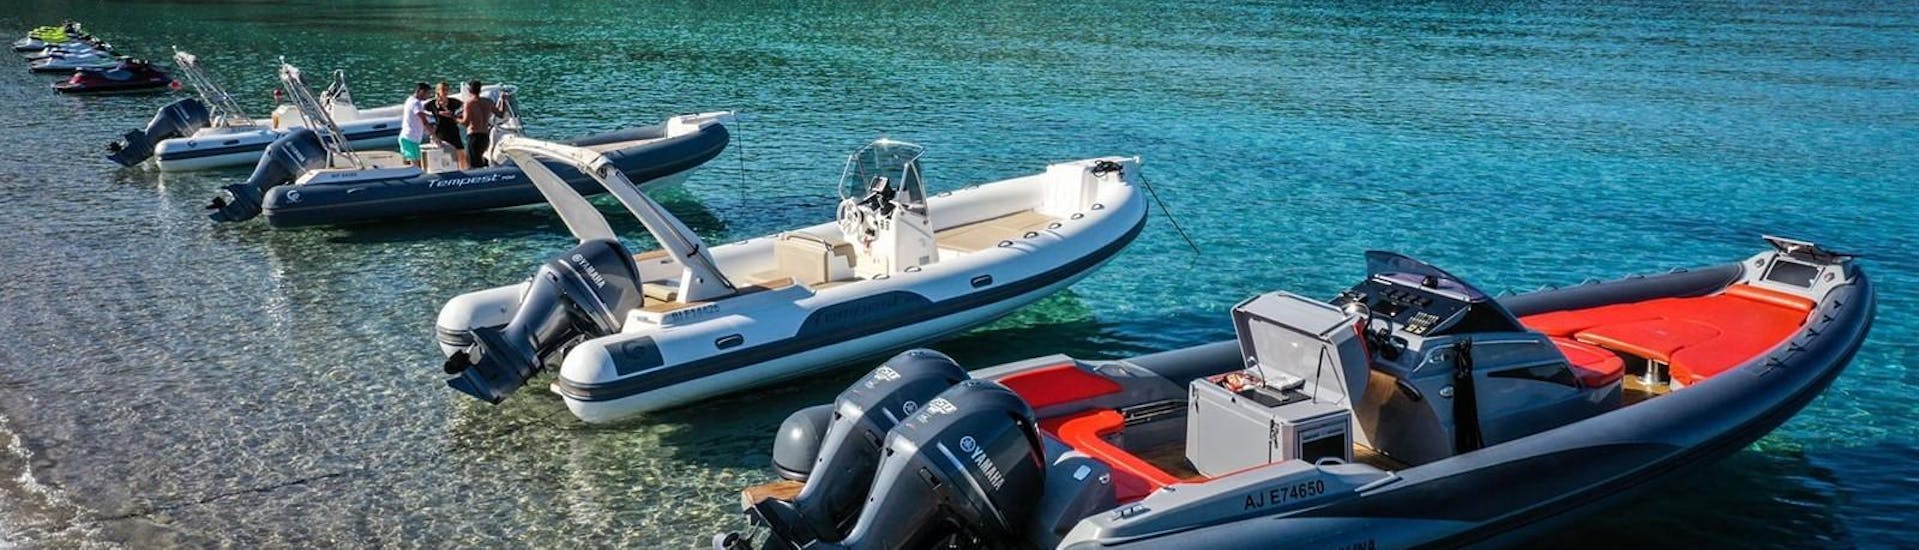 The RIB Boats of Nautic Evasion Cargèse, on the water, available for rent.